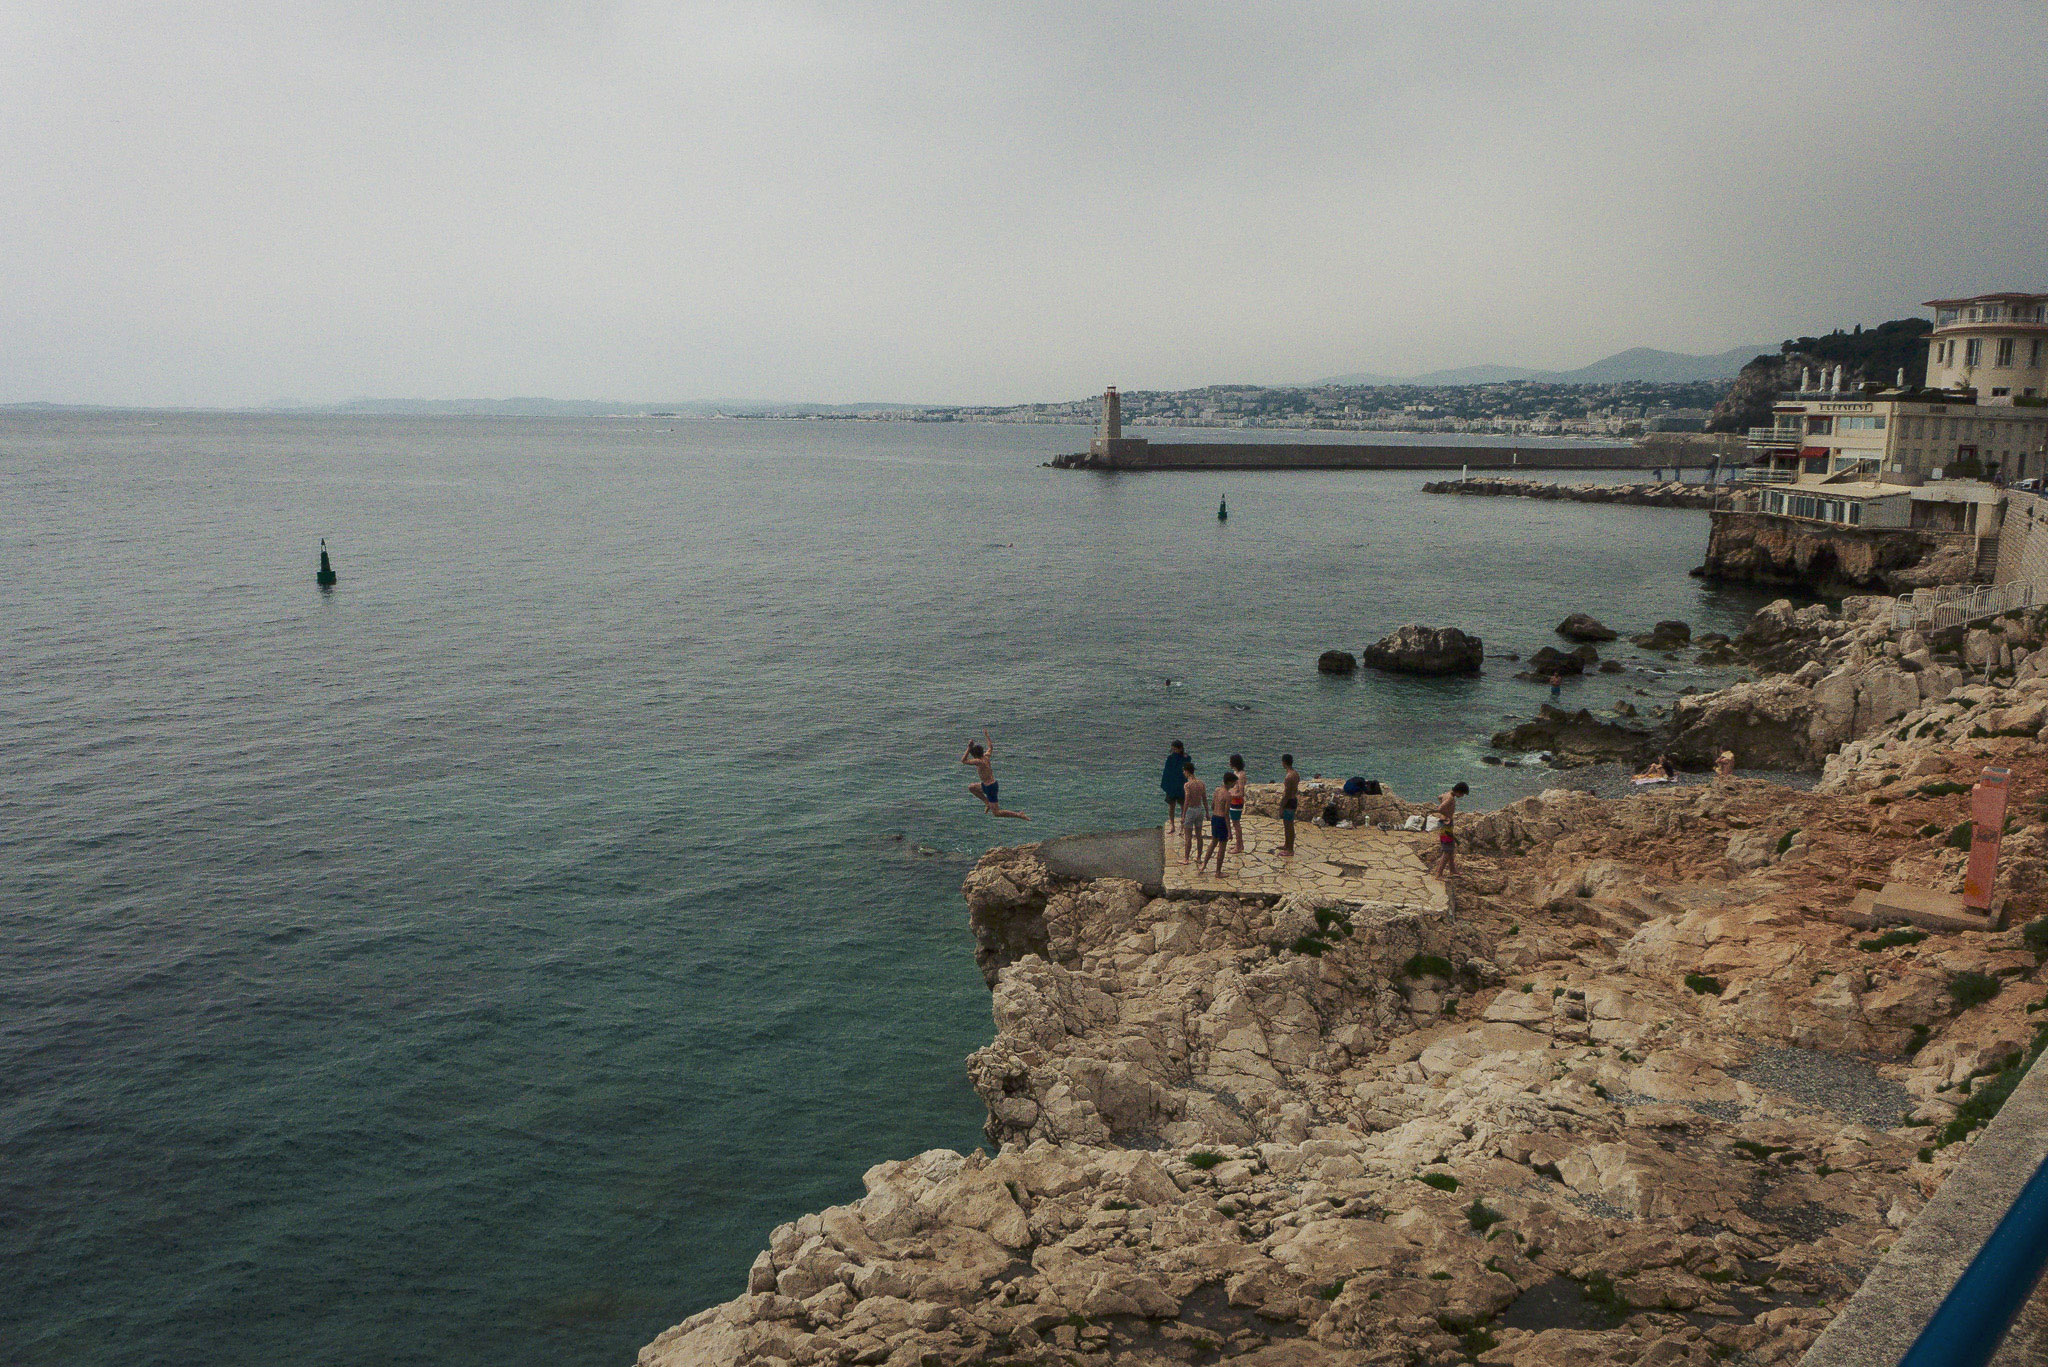 A young boy jumping from the rocks into the sea at La Réserve de Nice